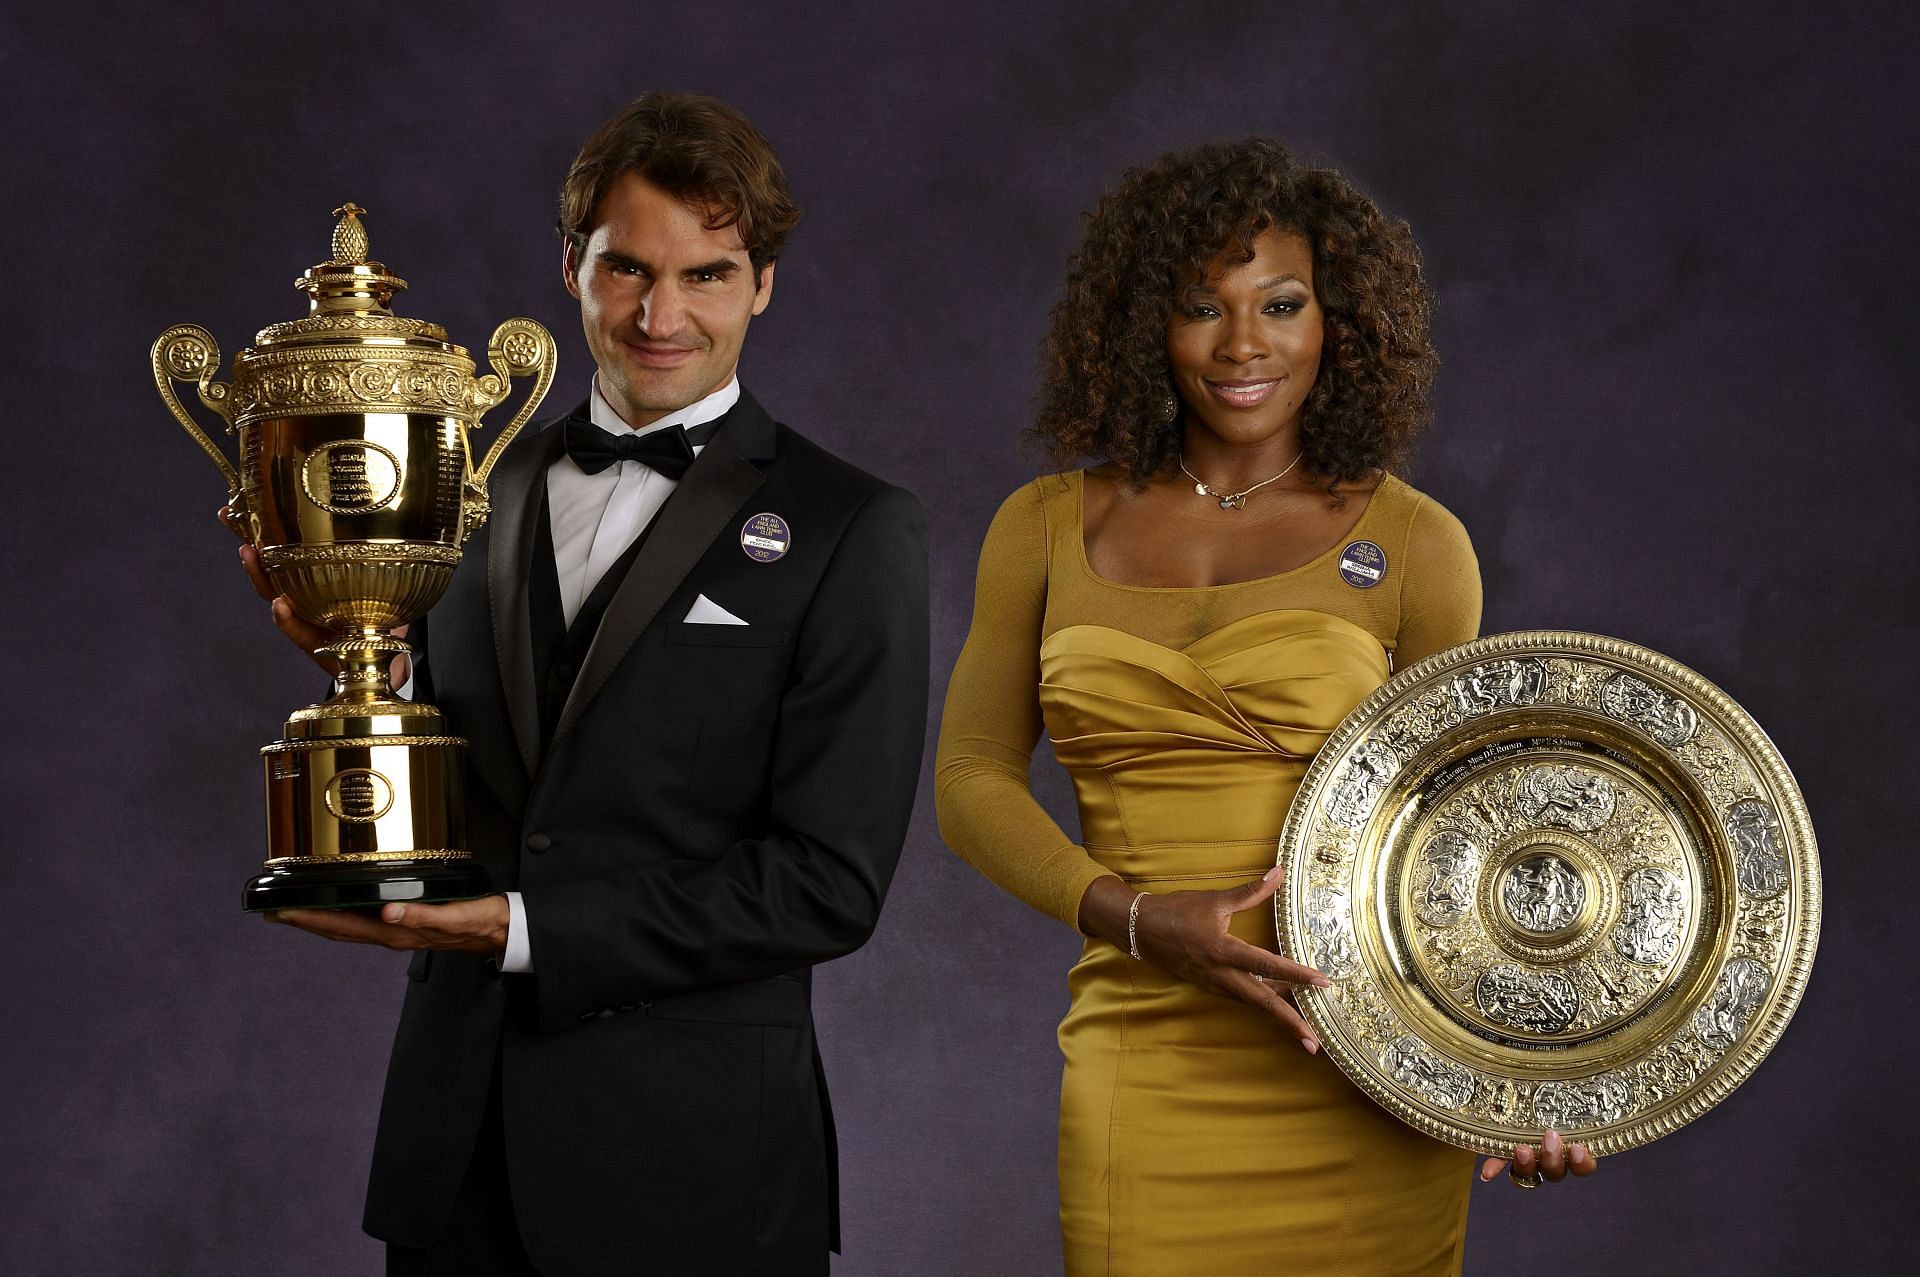 Federer and Williams announced their retirements only a few weeks apart